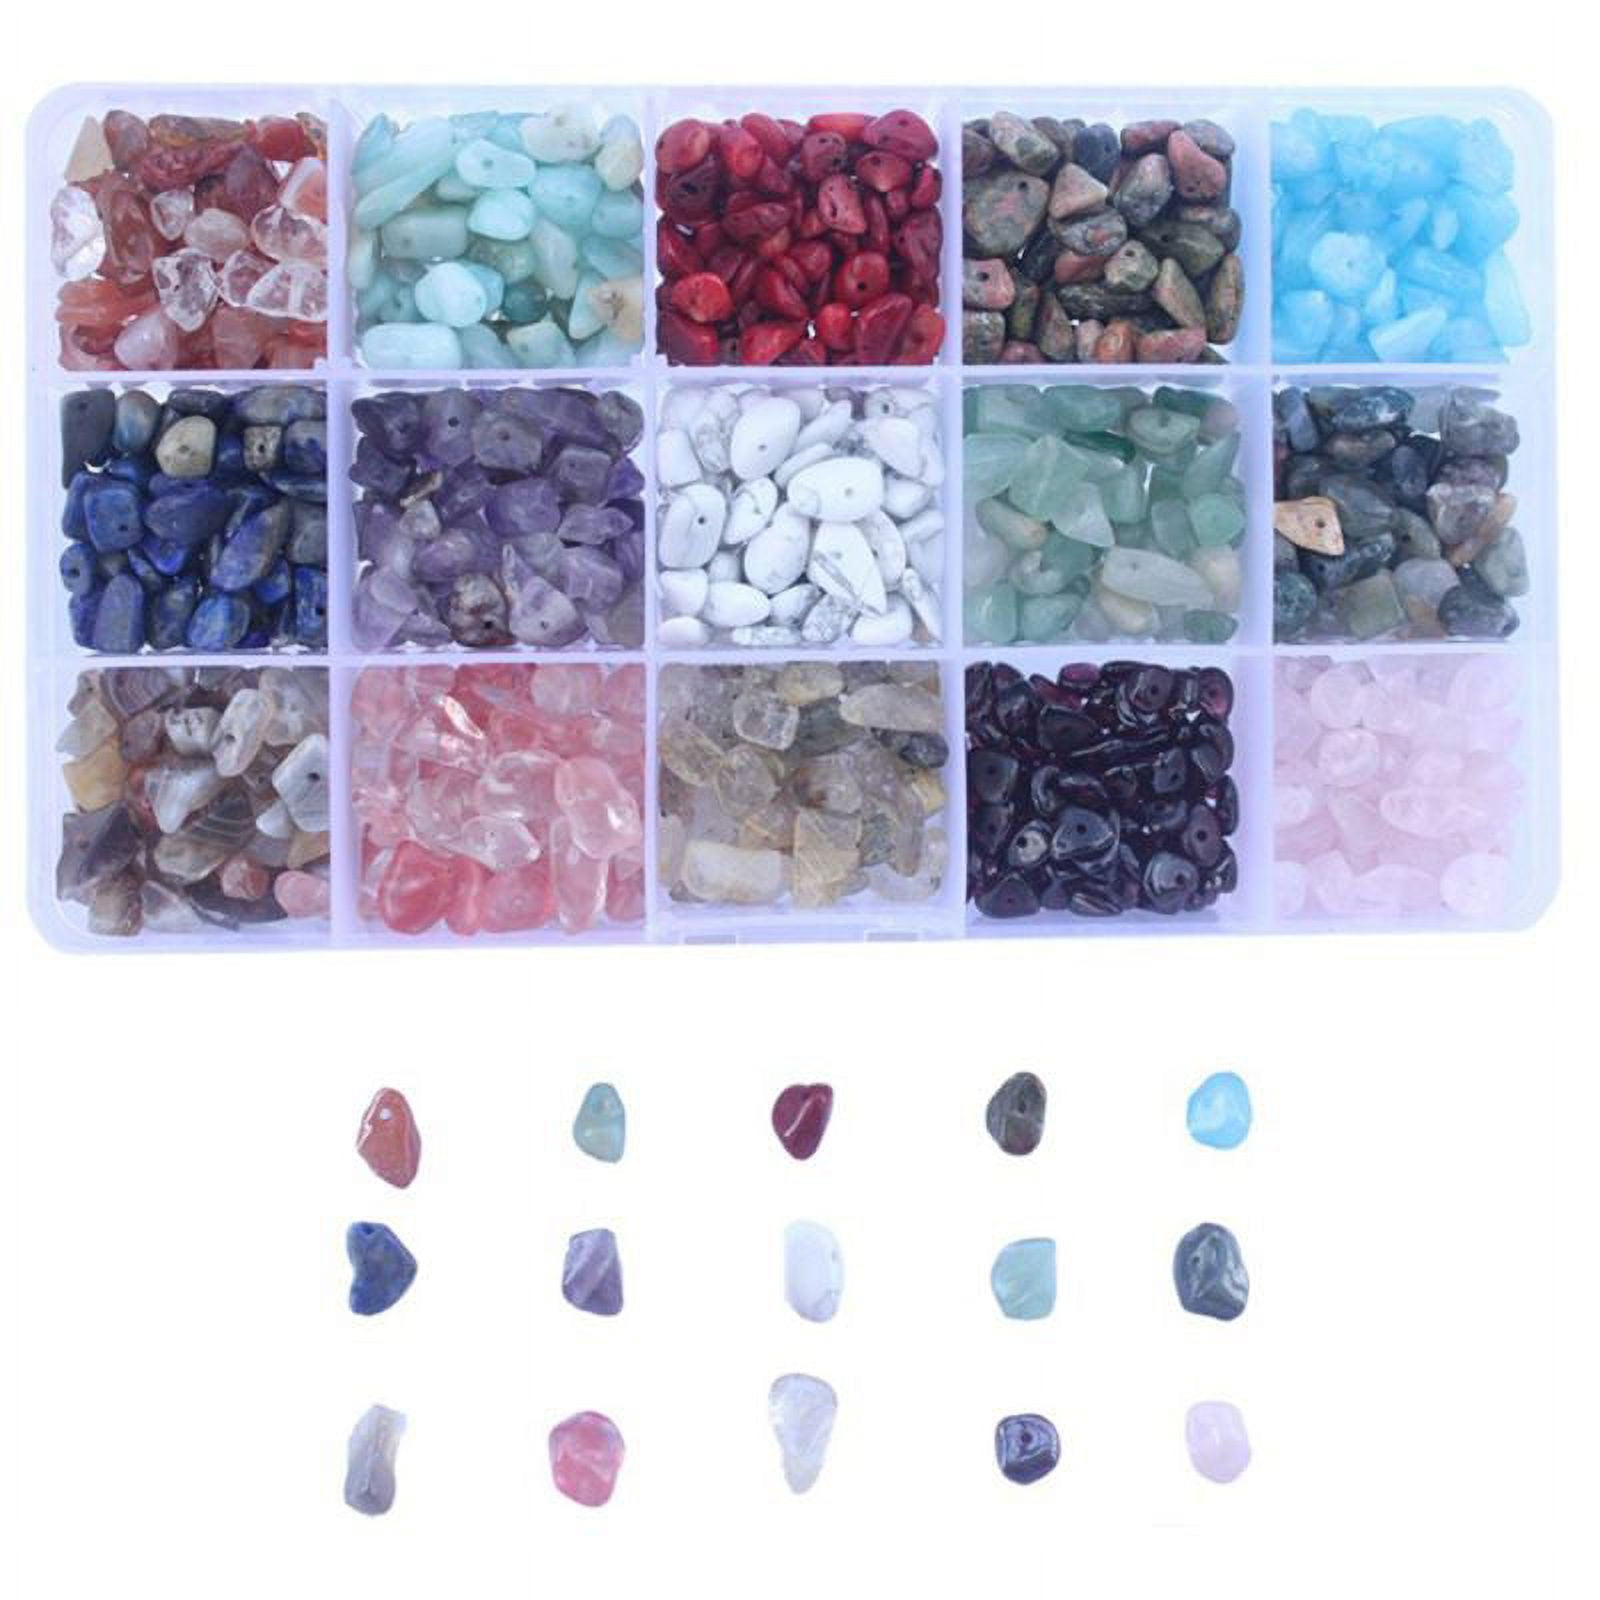 Reactionnx 600 Pcs Chakra Beads Lava Beads Rock Stone Assorted Colored Volcanic Gemstone Beads Spacer Beads for Bracelet Jewelry Making, Other